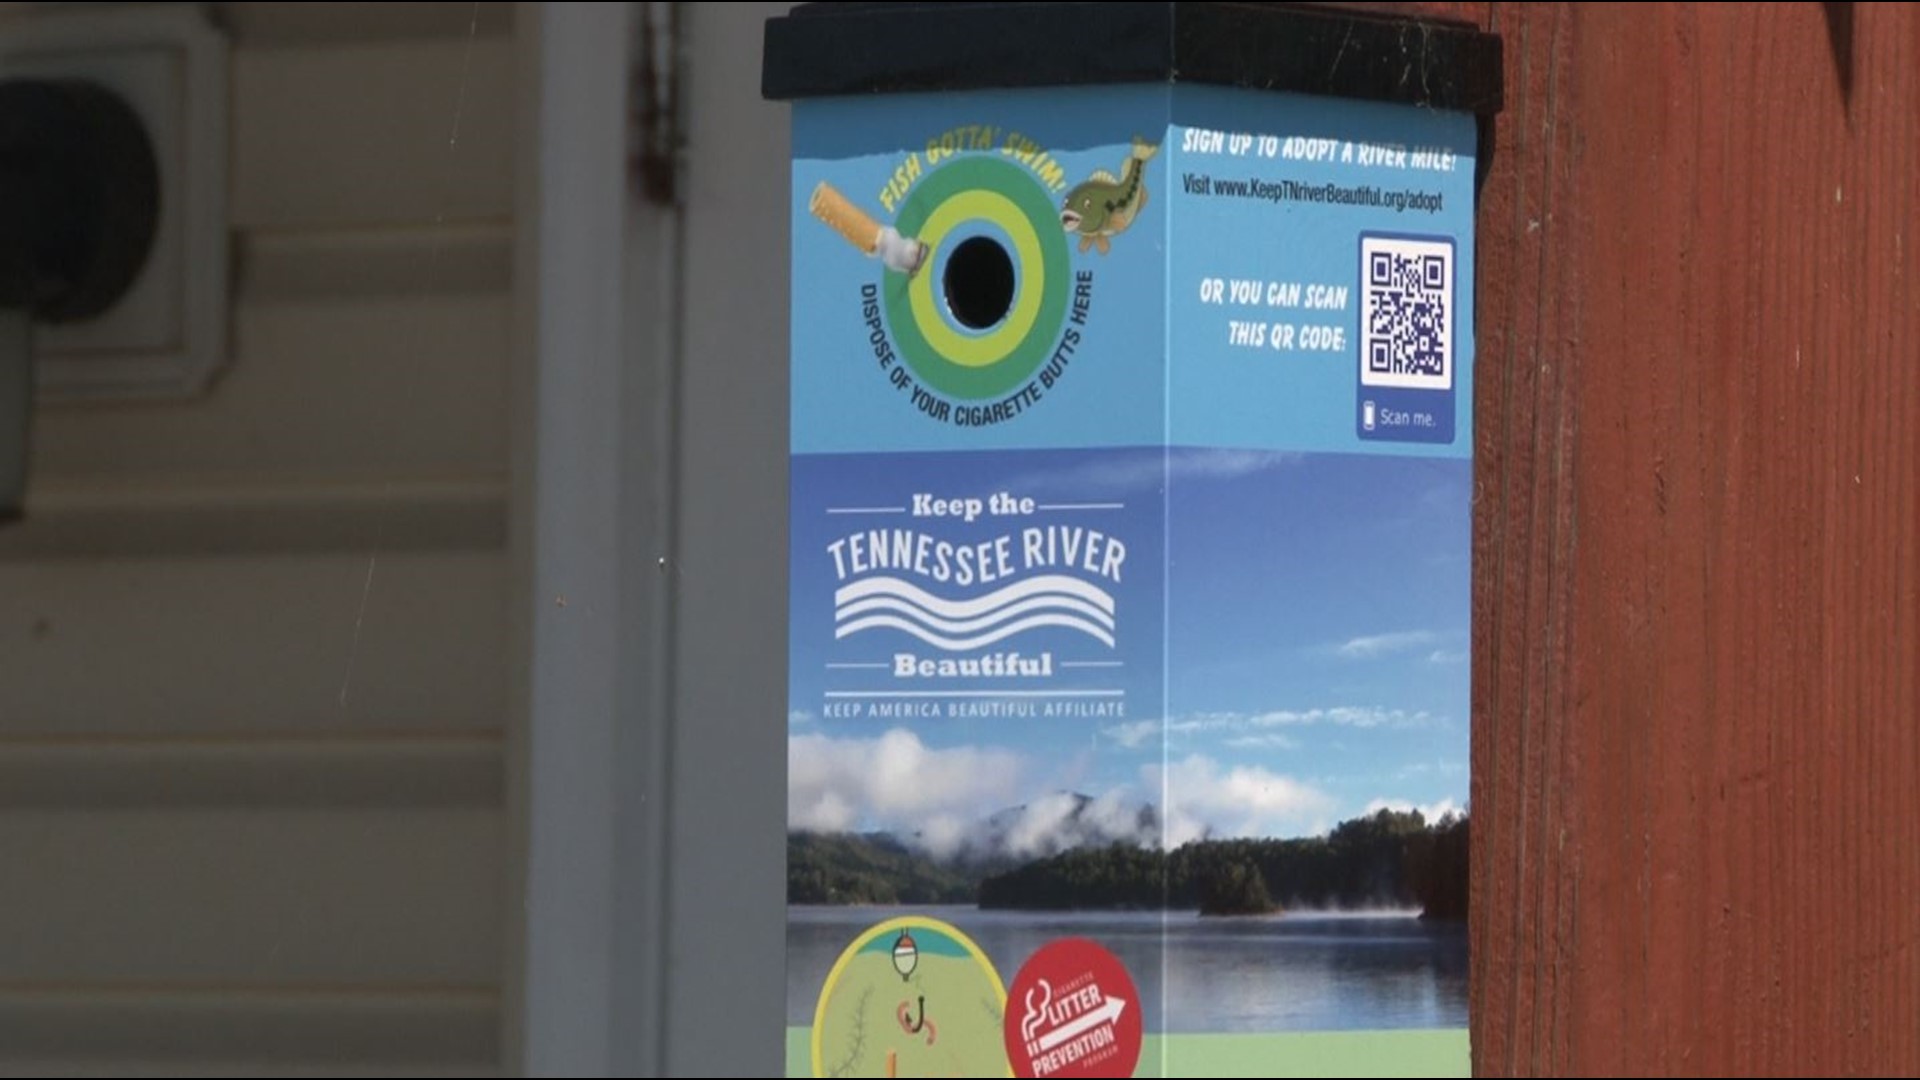 Marinas along the Tennessee River are installing art-wrapped waste bins to keep cigarettes out of the water. The metal containers will be installed along the river in five states, including our area.